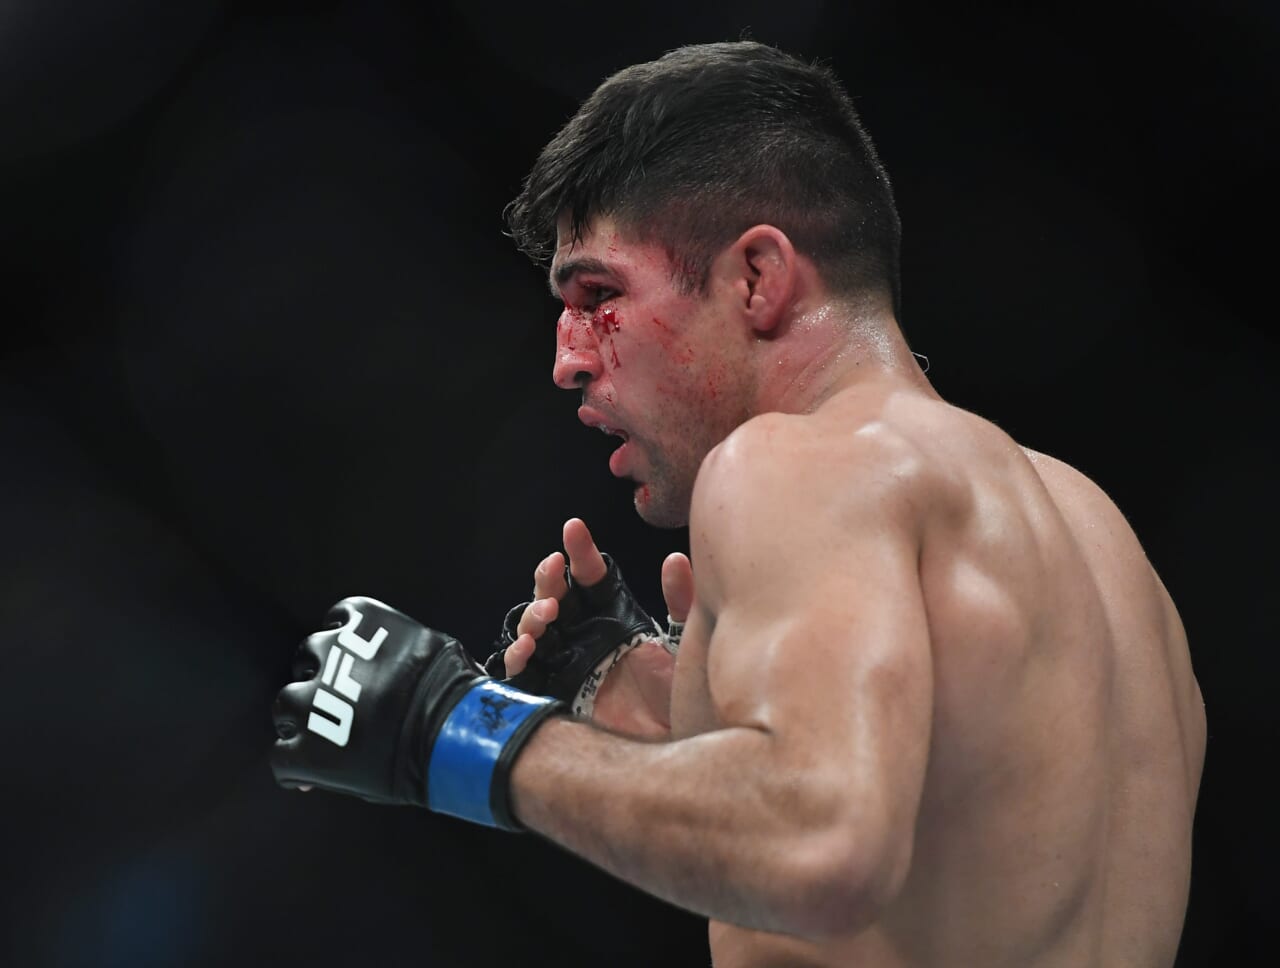 After his win at UFC 260, what’s next for Vicente Luque?